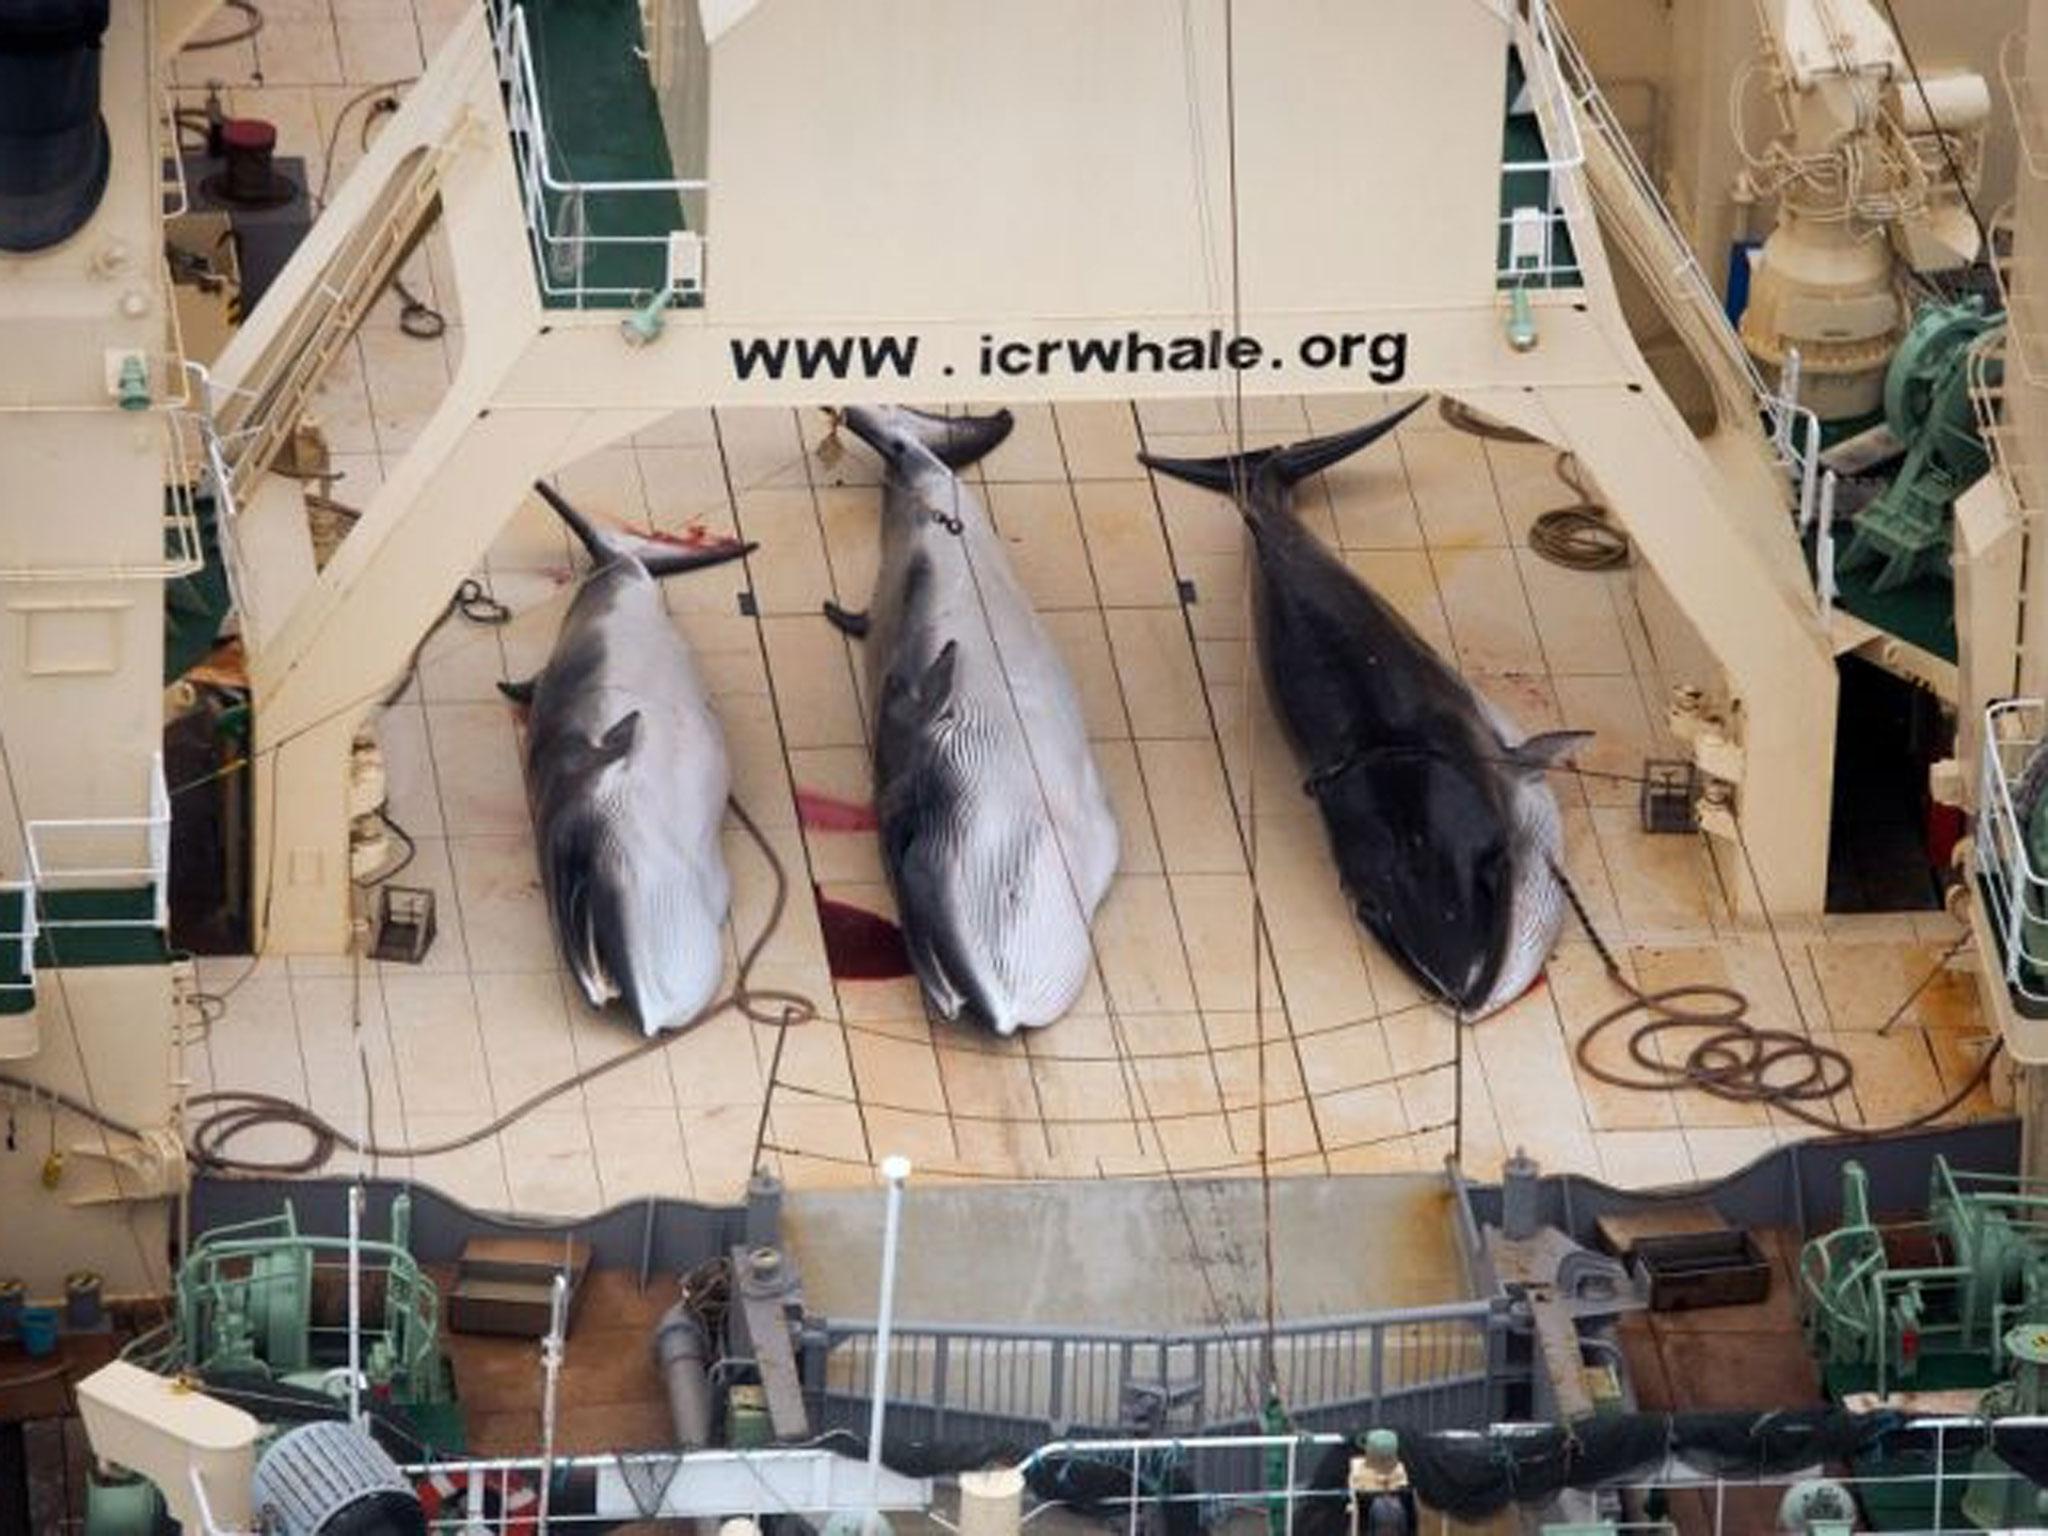 A photo taken on 5 Jan2014 shows three dead minke whales on the deck of the Japanese whaling vessel Nisshin Maru, in the Southern Ocean.